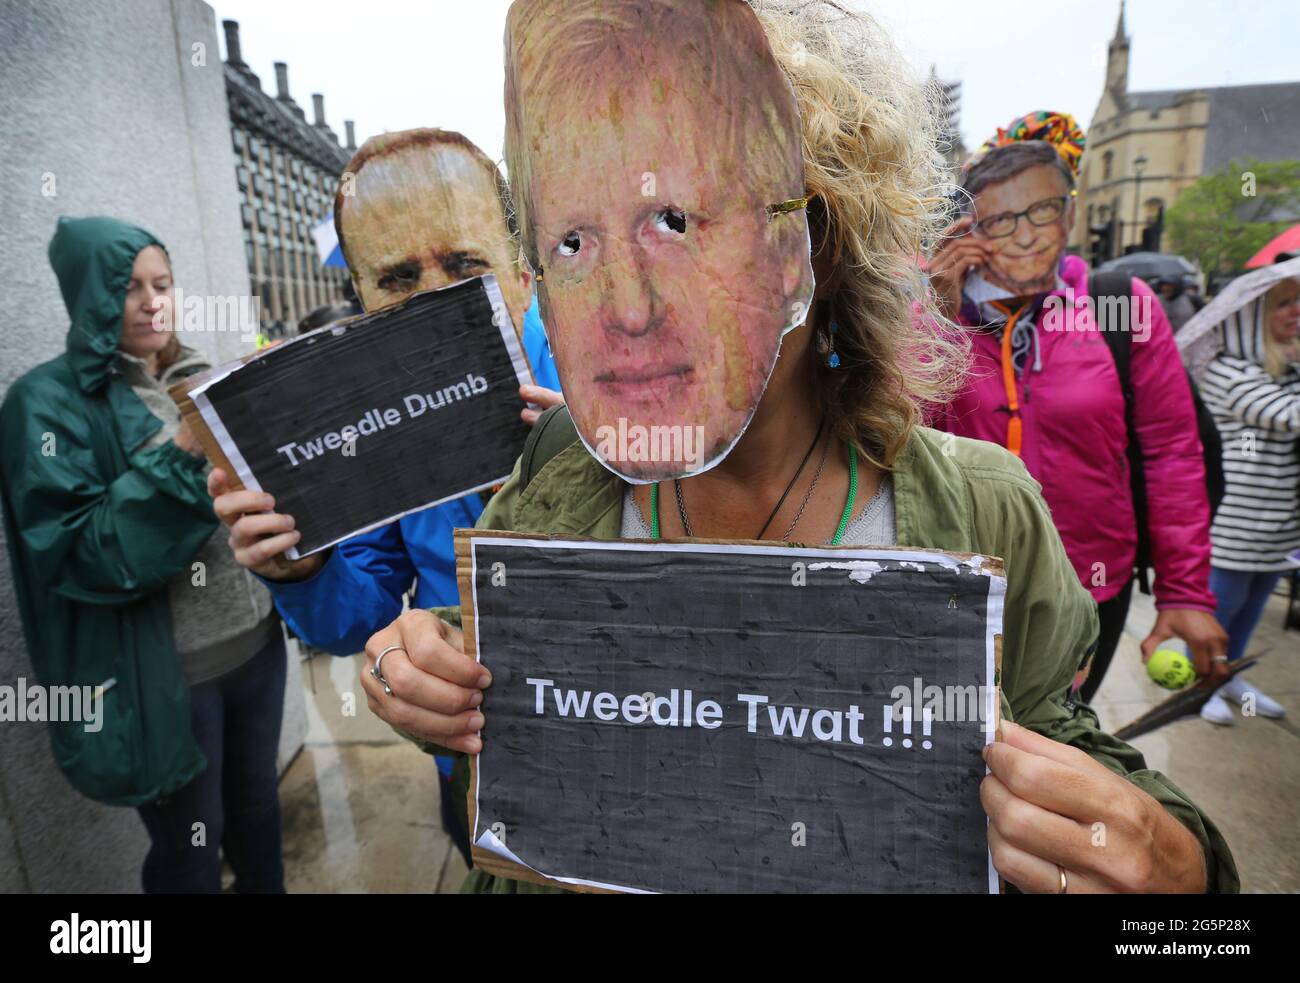 Protesters wearing Boris Johnson, Matt Hancock and Bill Gates masks hold placards during the demonstration.Anti-lockdown and anti-vaccination demonstrators held a protest against lockdown extension, masks and vaccination passports. Stock Photo